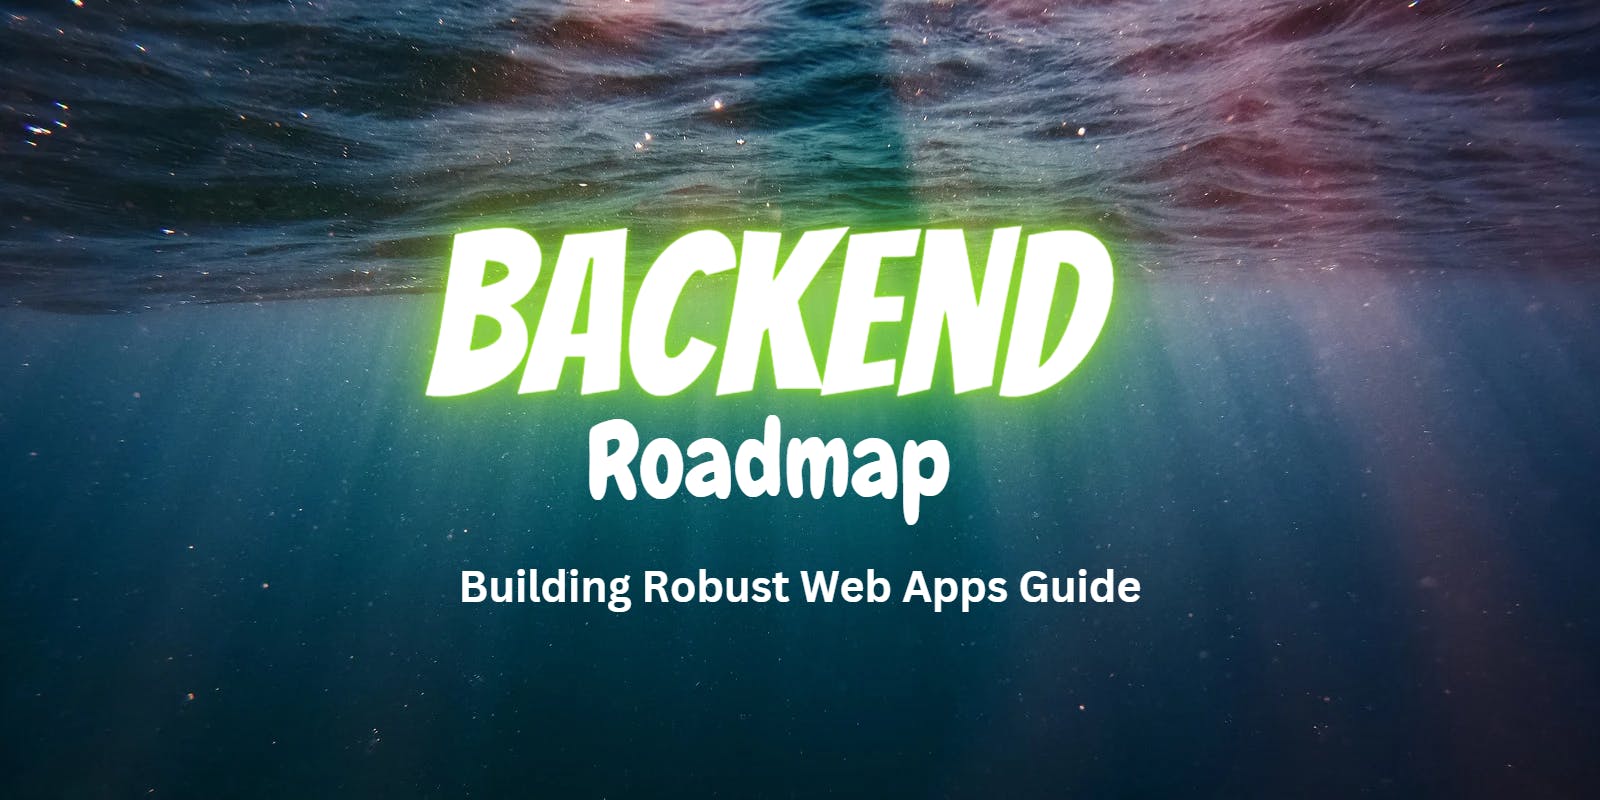 Backend Roadmap- Building Robust Web Apps Guide